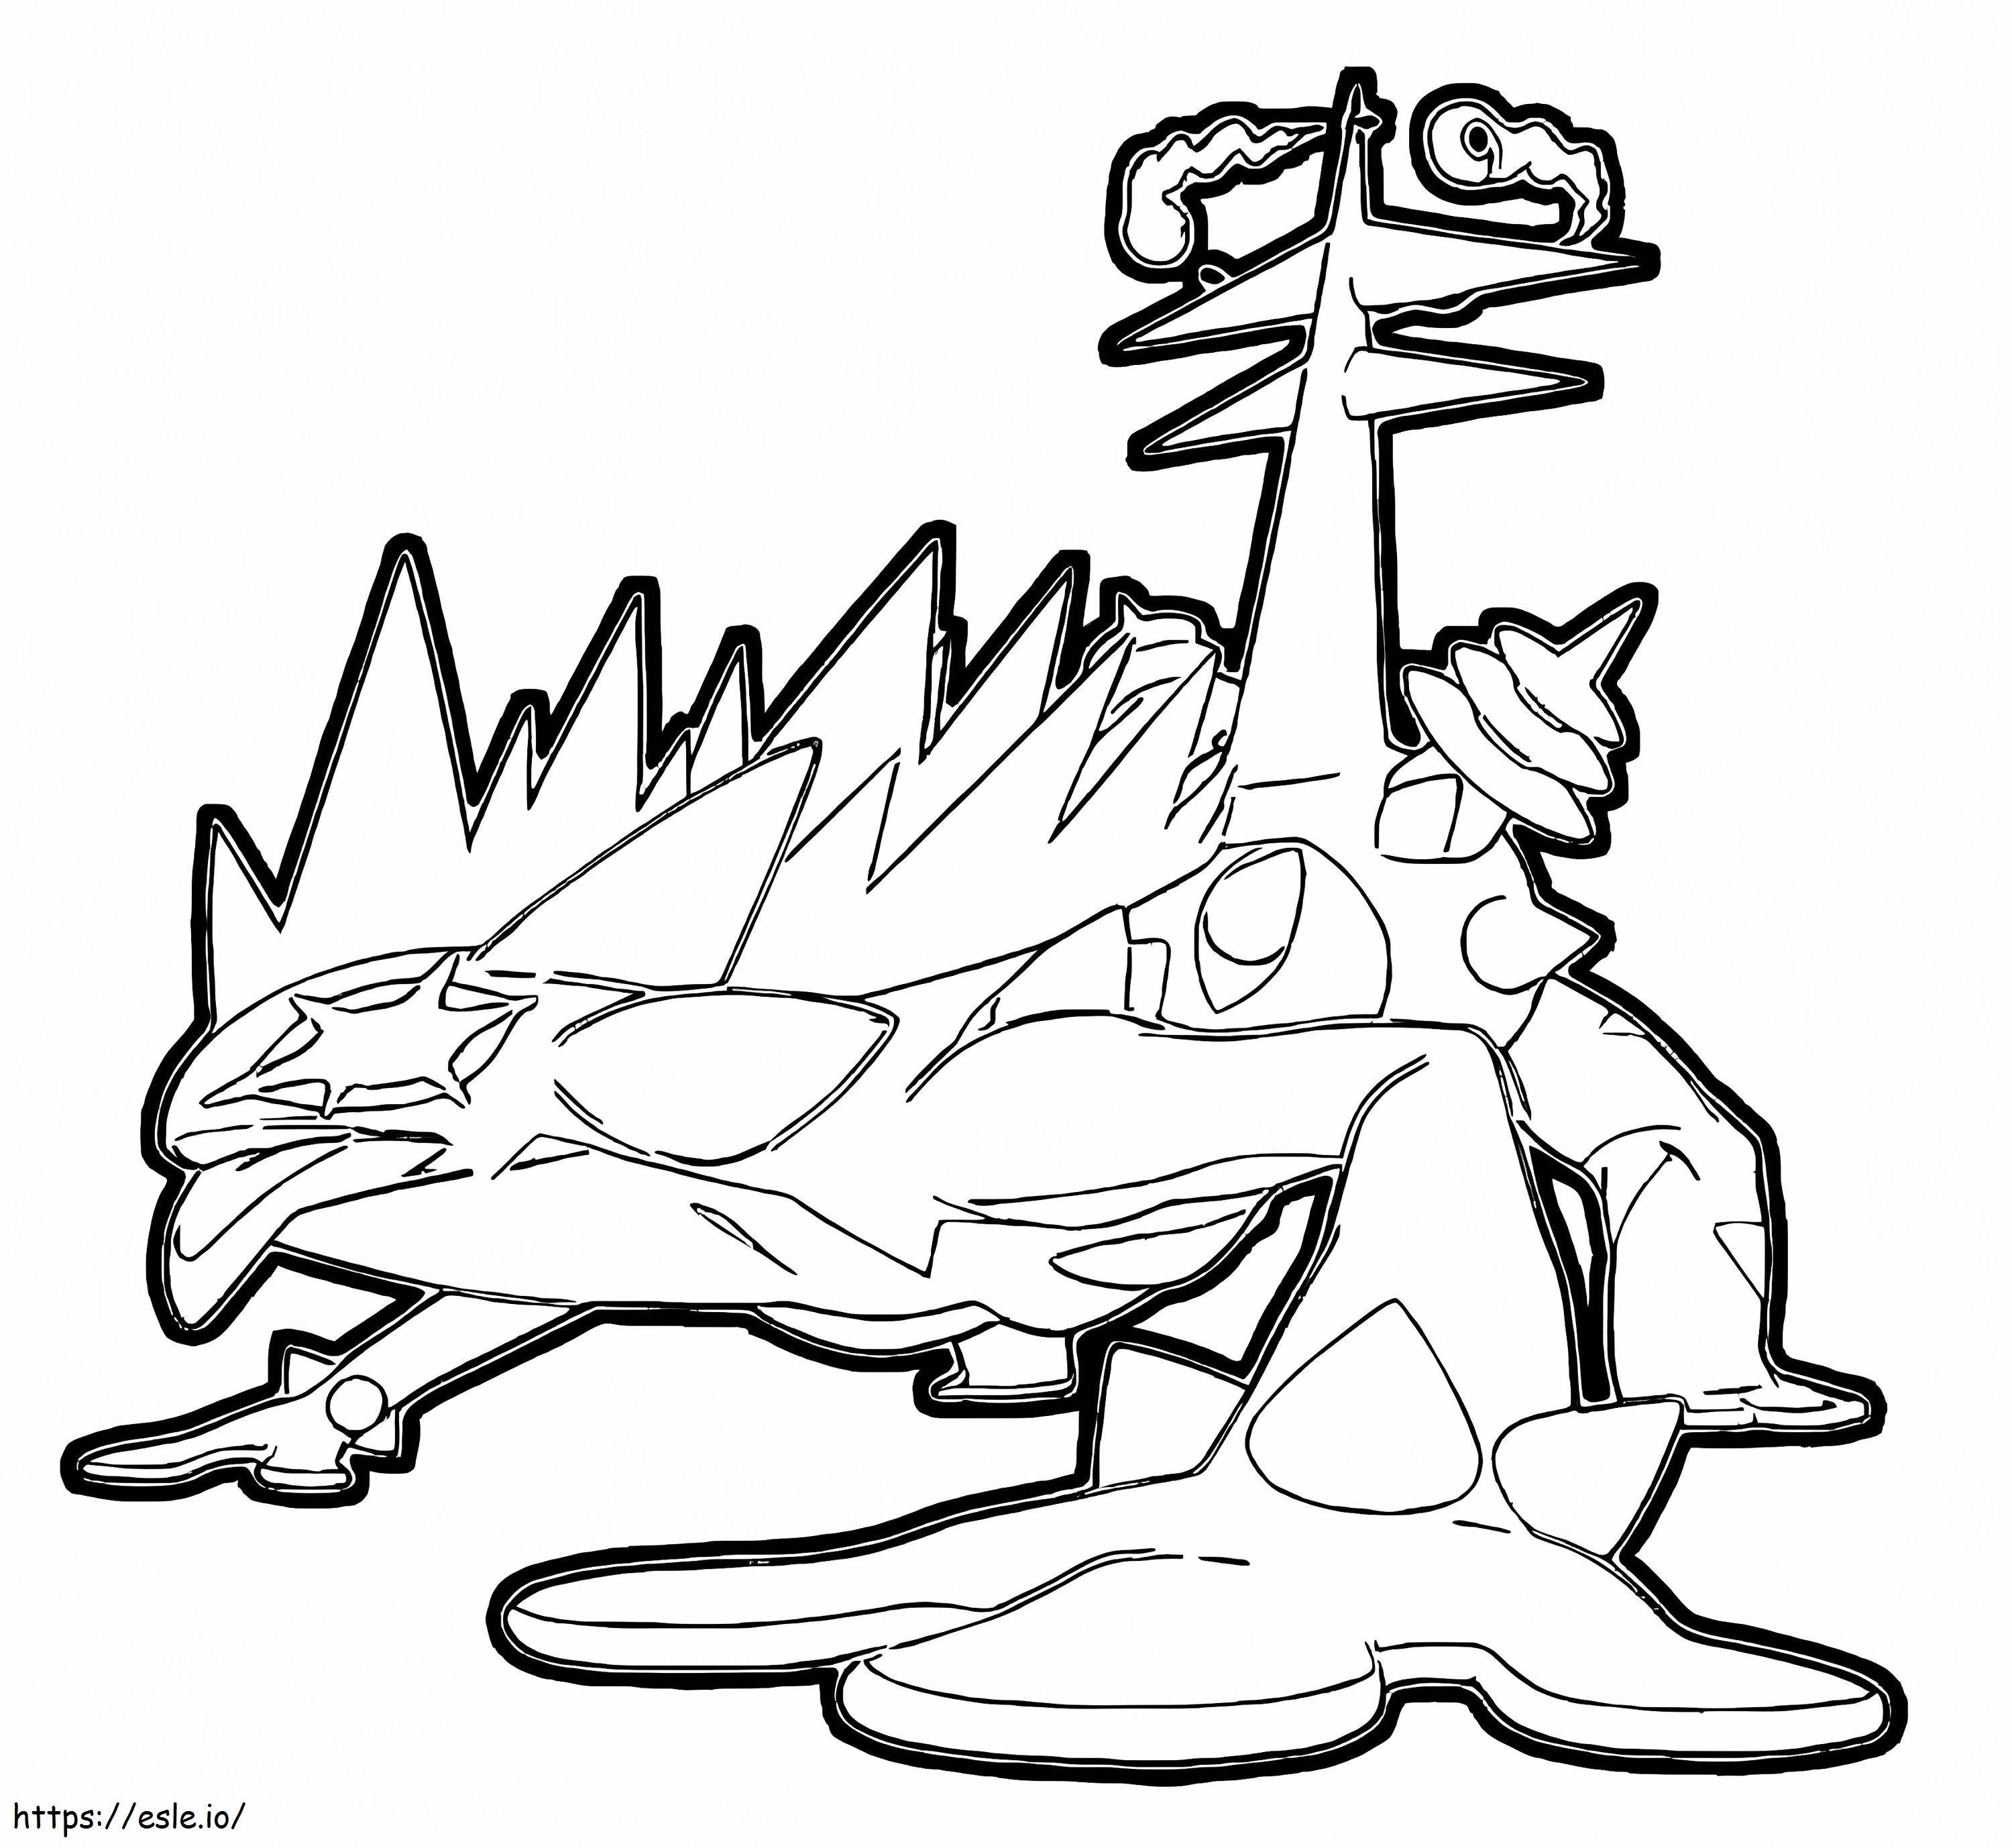 Gigantamax Toxtricity coloring page